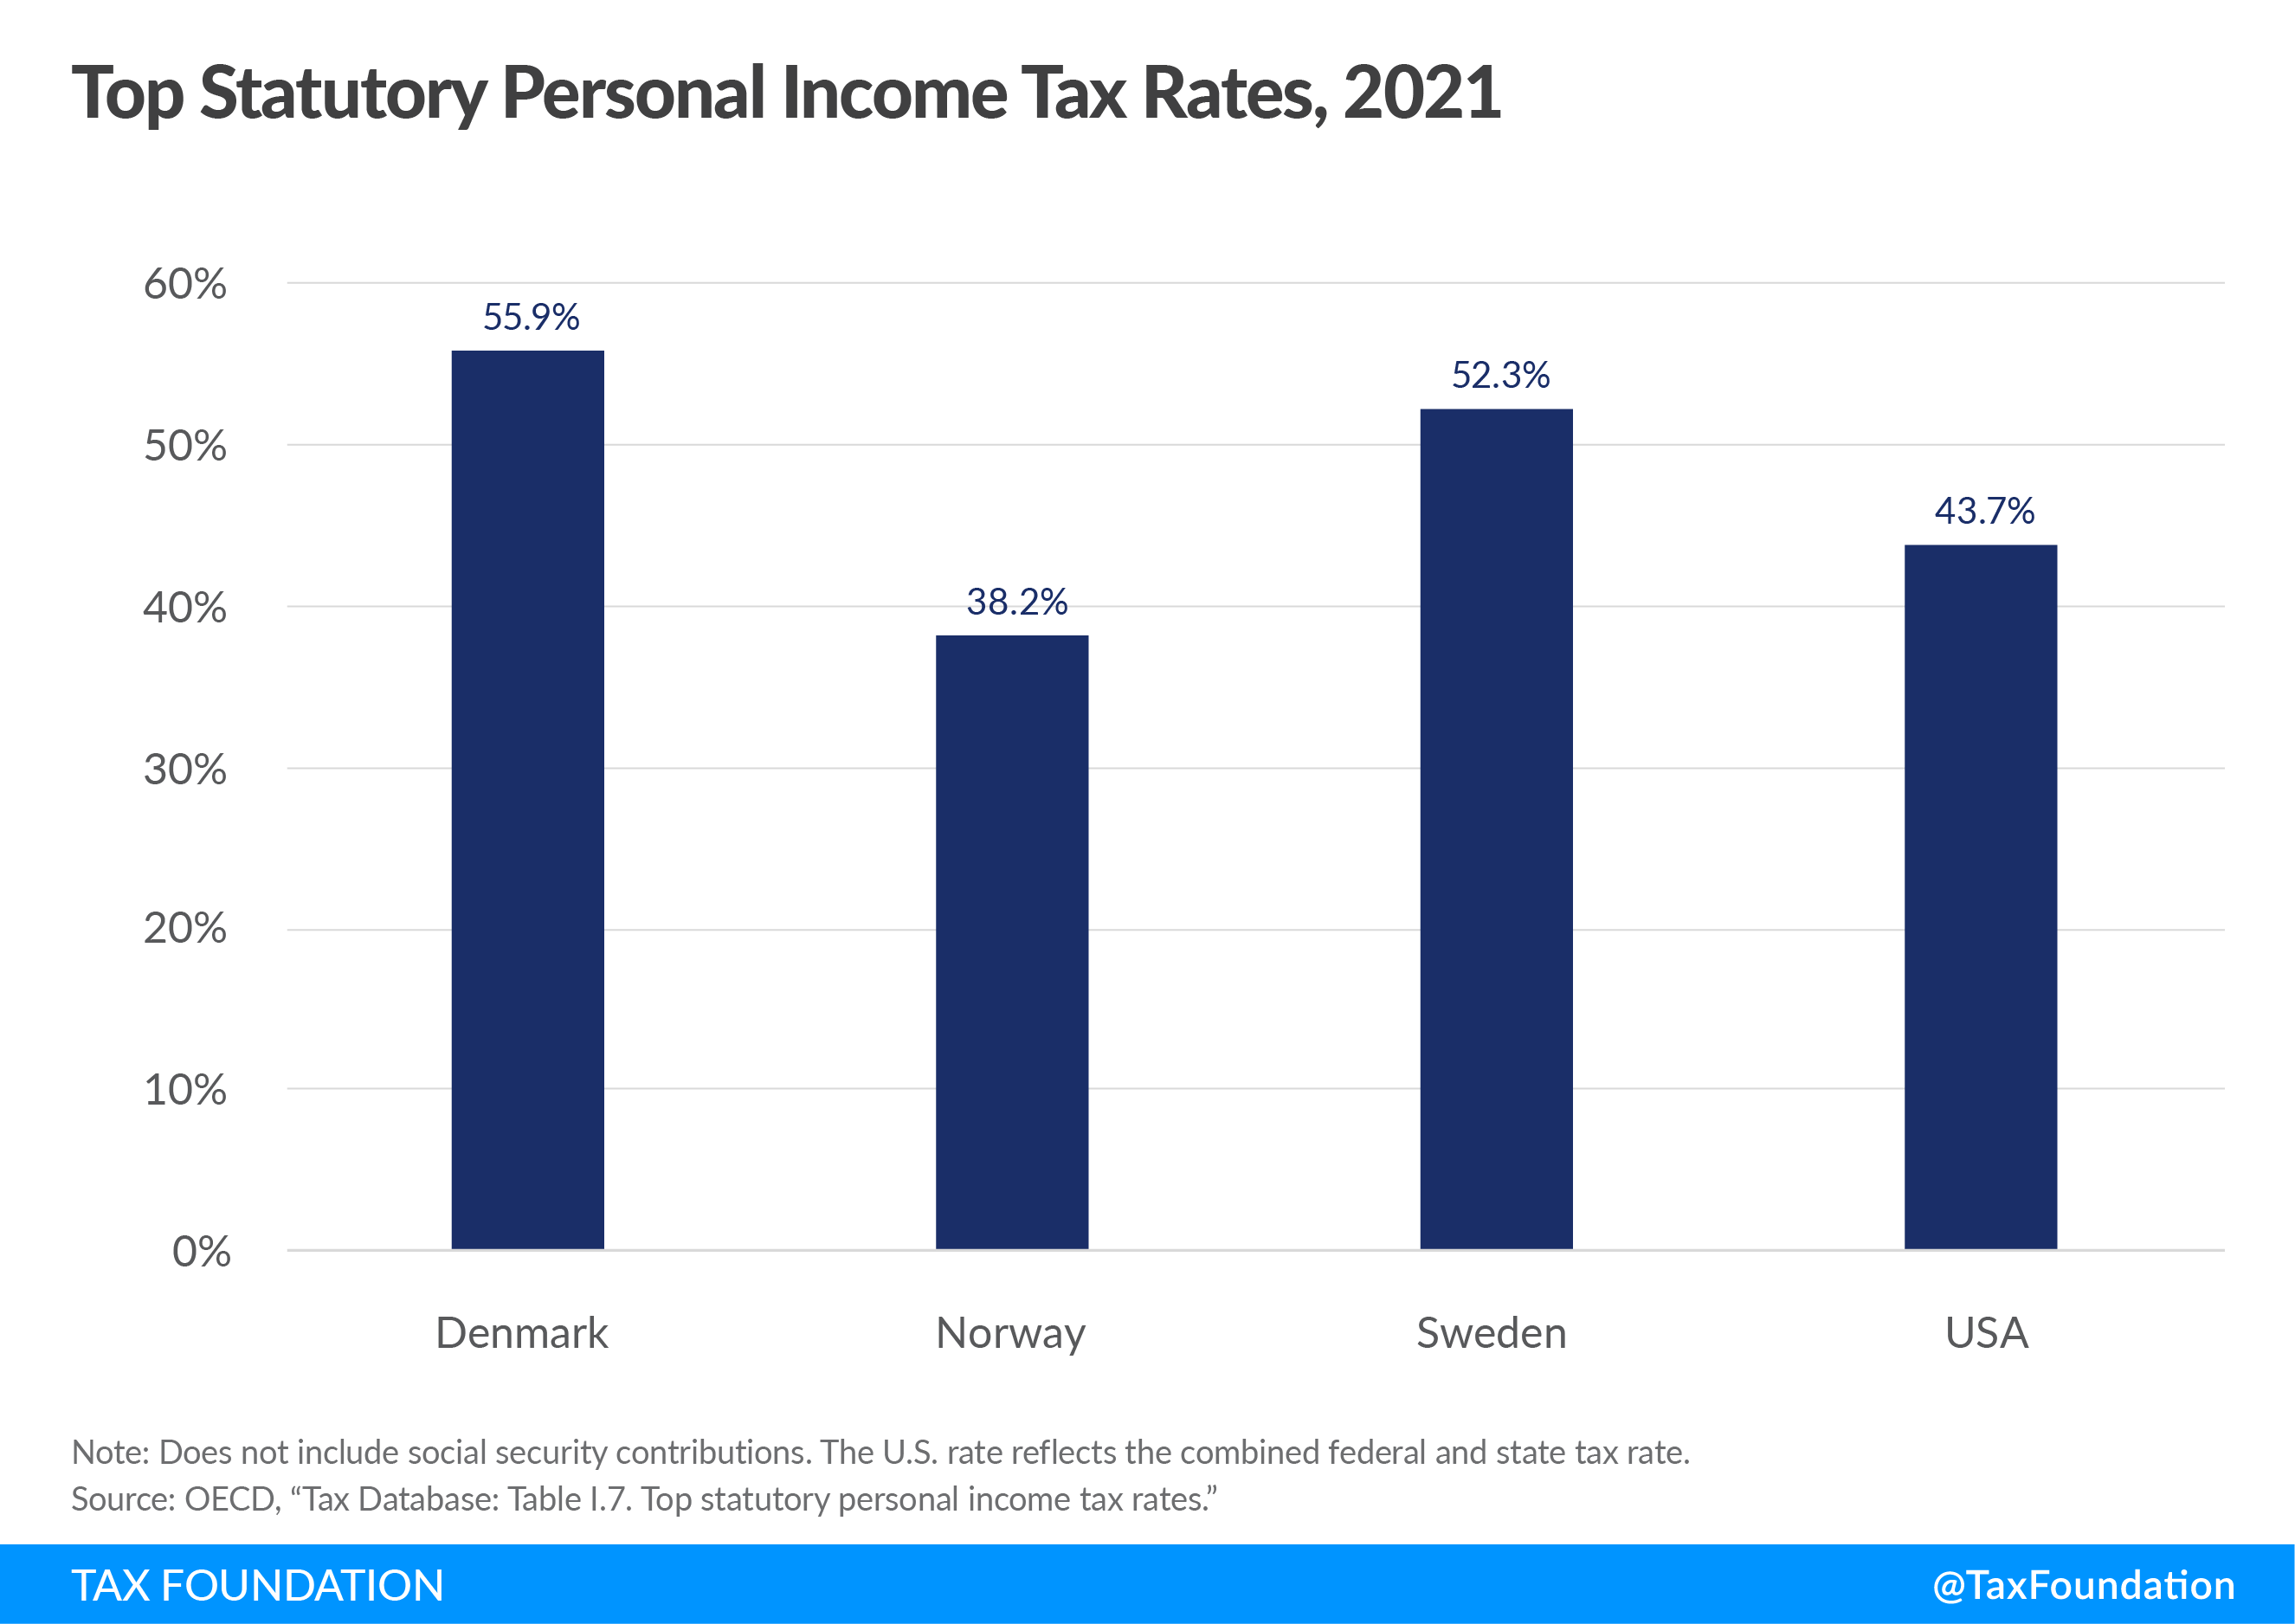 US federal income tax rates compared to Scandinavian countries nordic model flat income tax systems